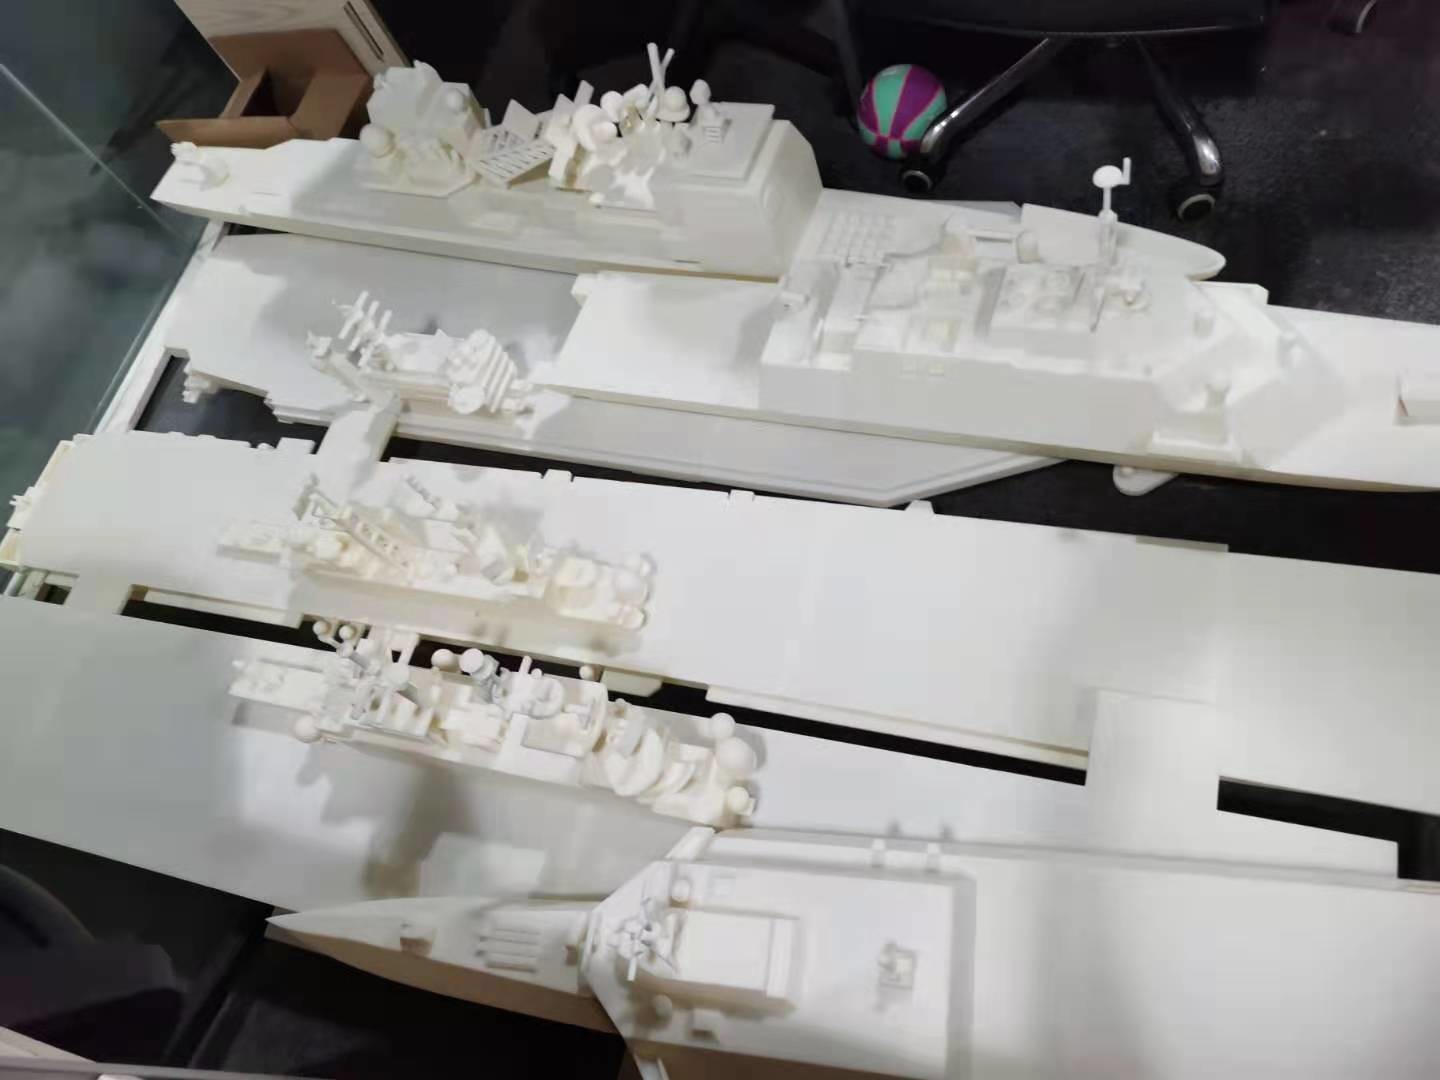 Aircraft Carrier Industrial FDM 3D Printing Service With Brushing